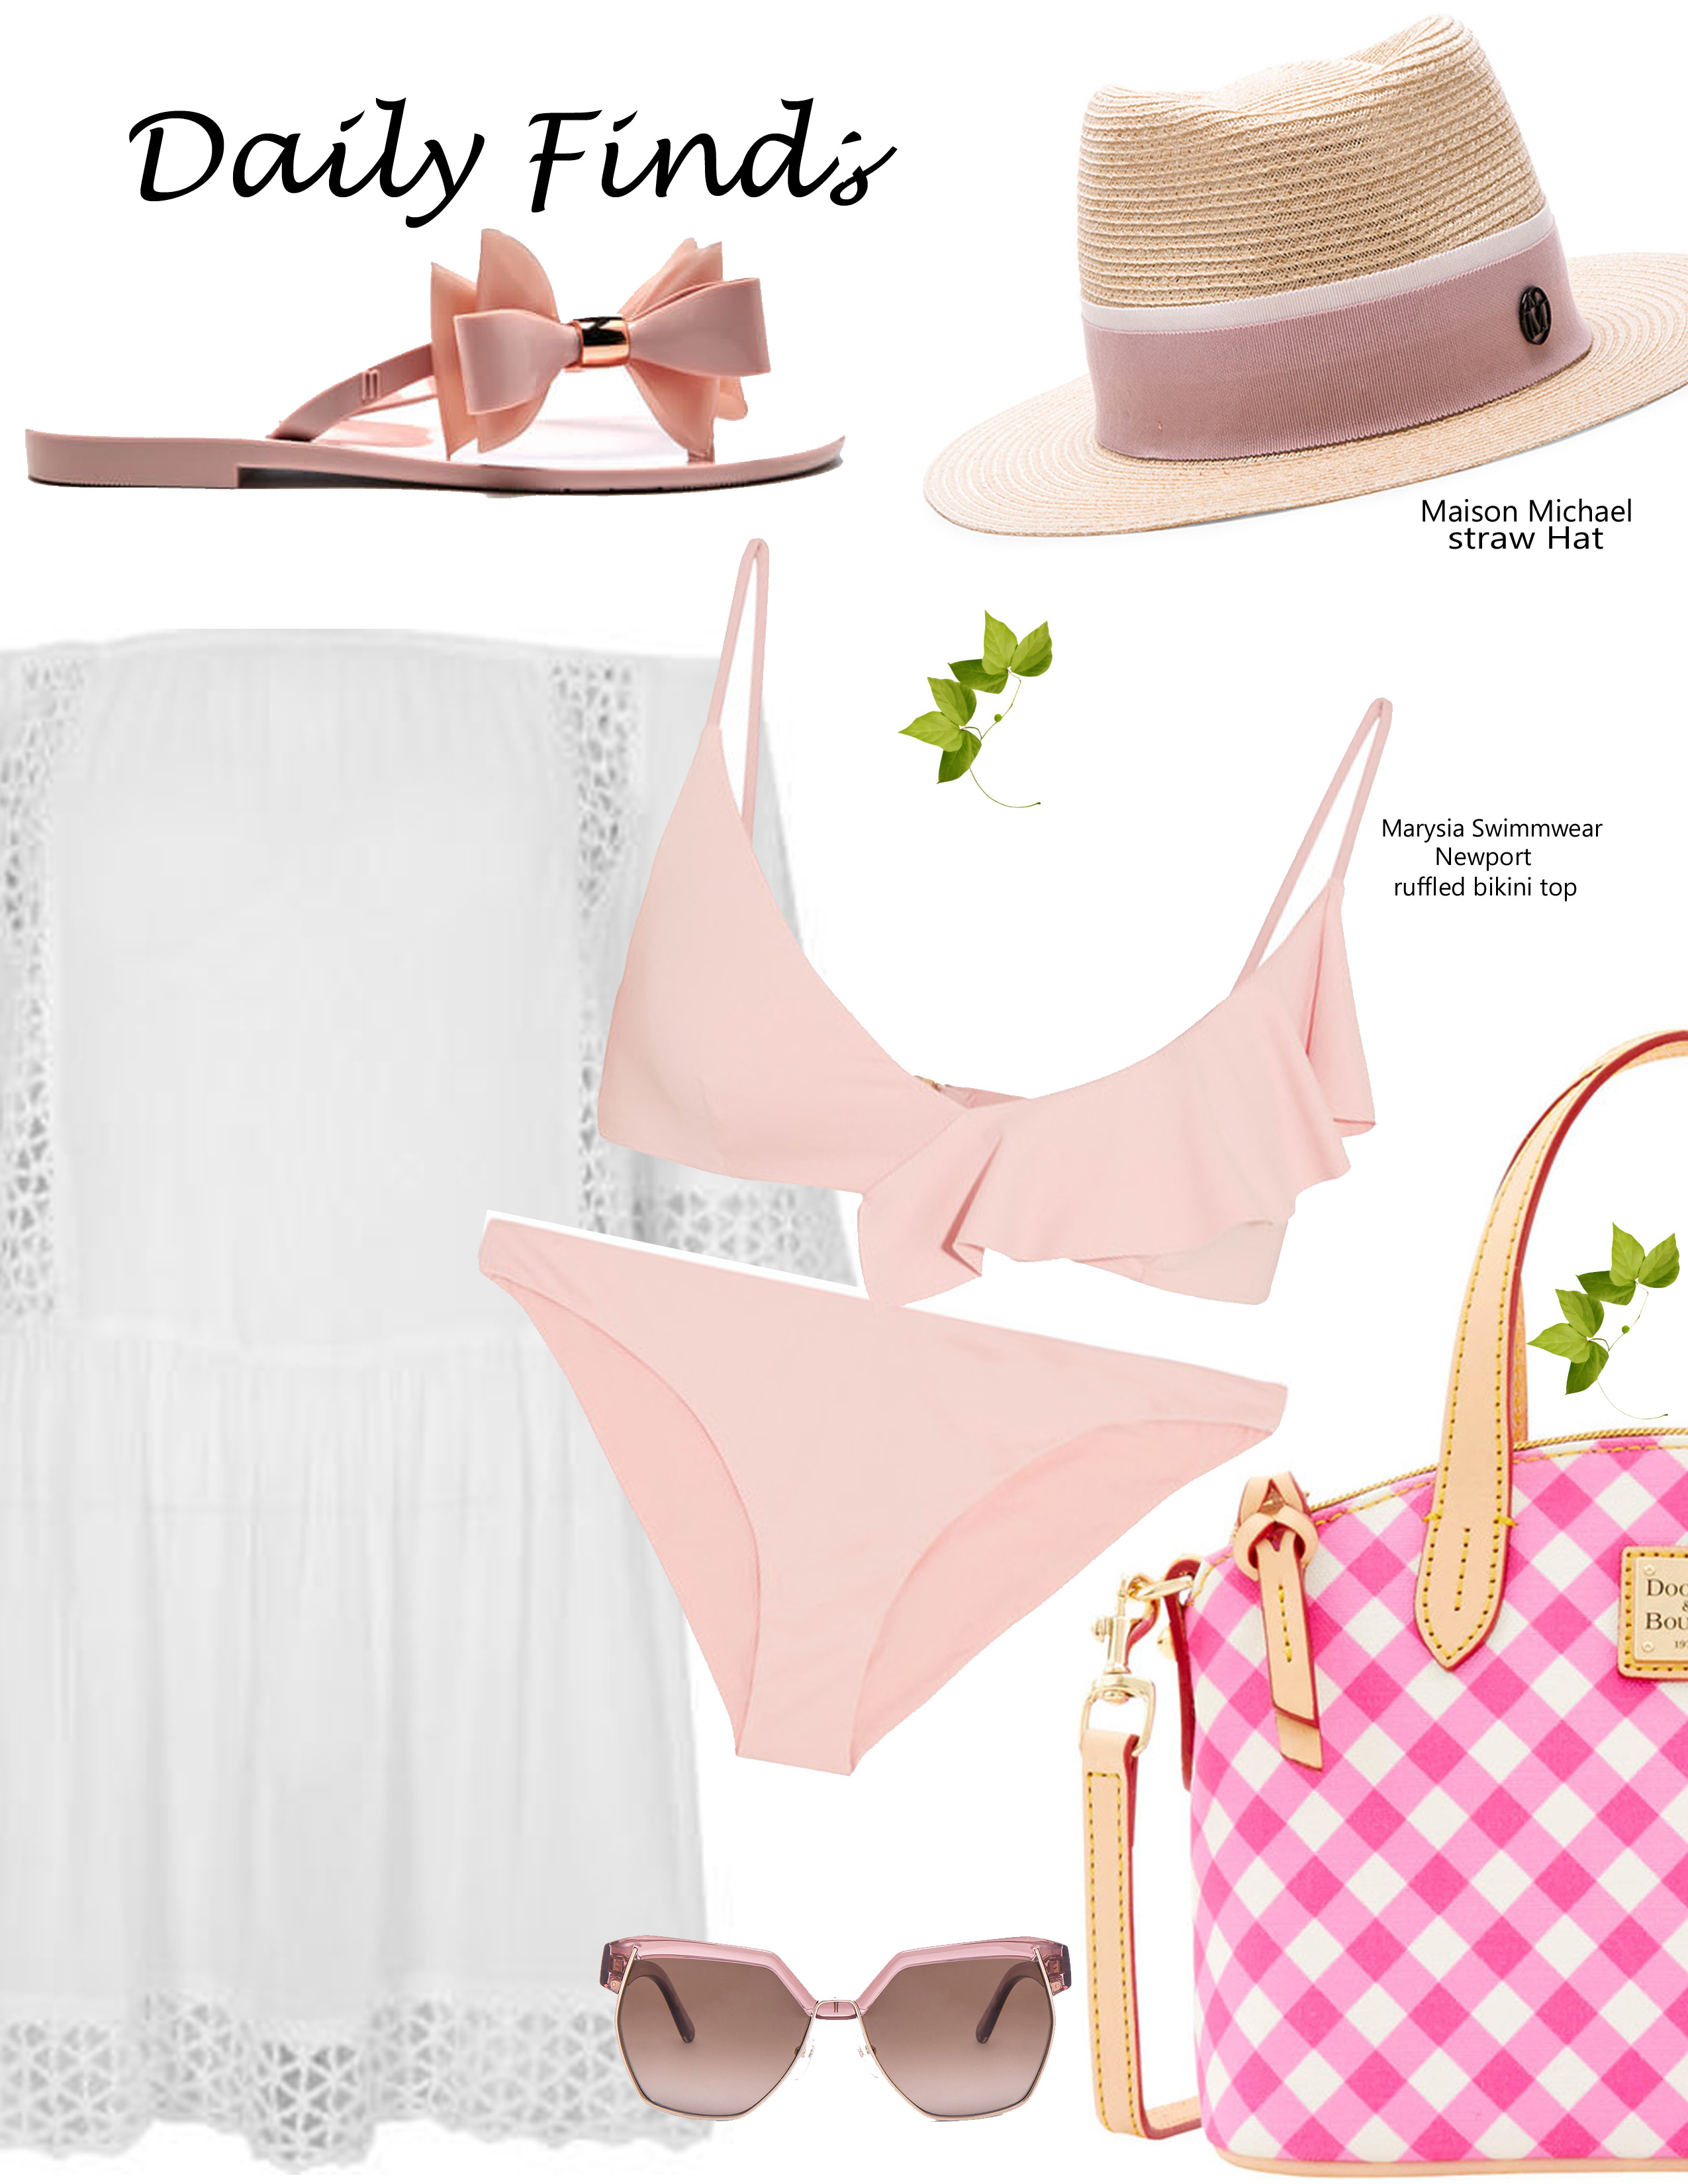 daily finds, beach outfit idea, bailylamb, womens beach fashion, pink ruffle swimmsuit, gingham beach tote